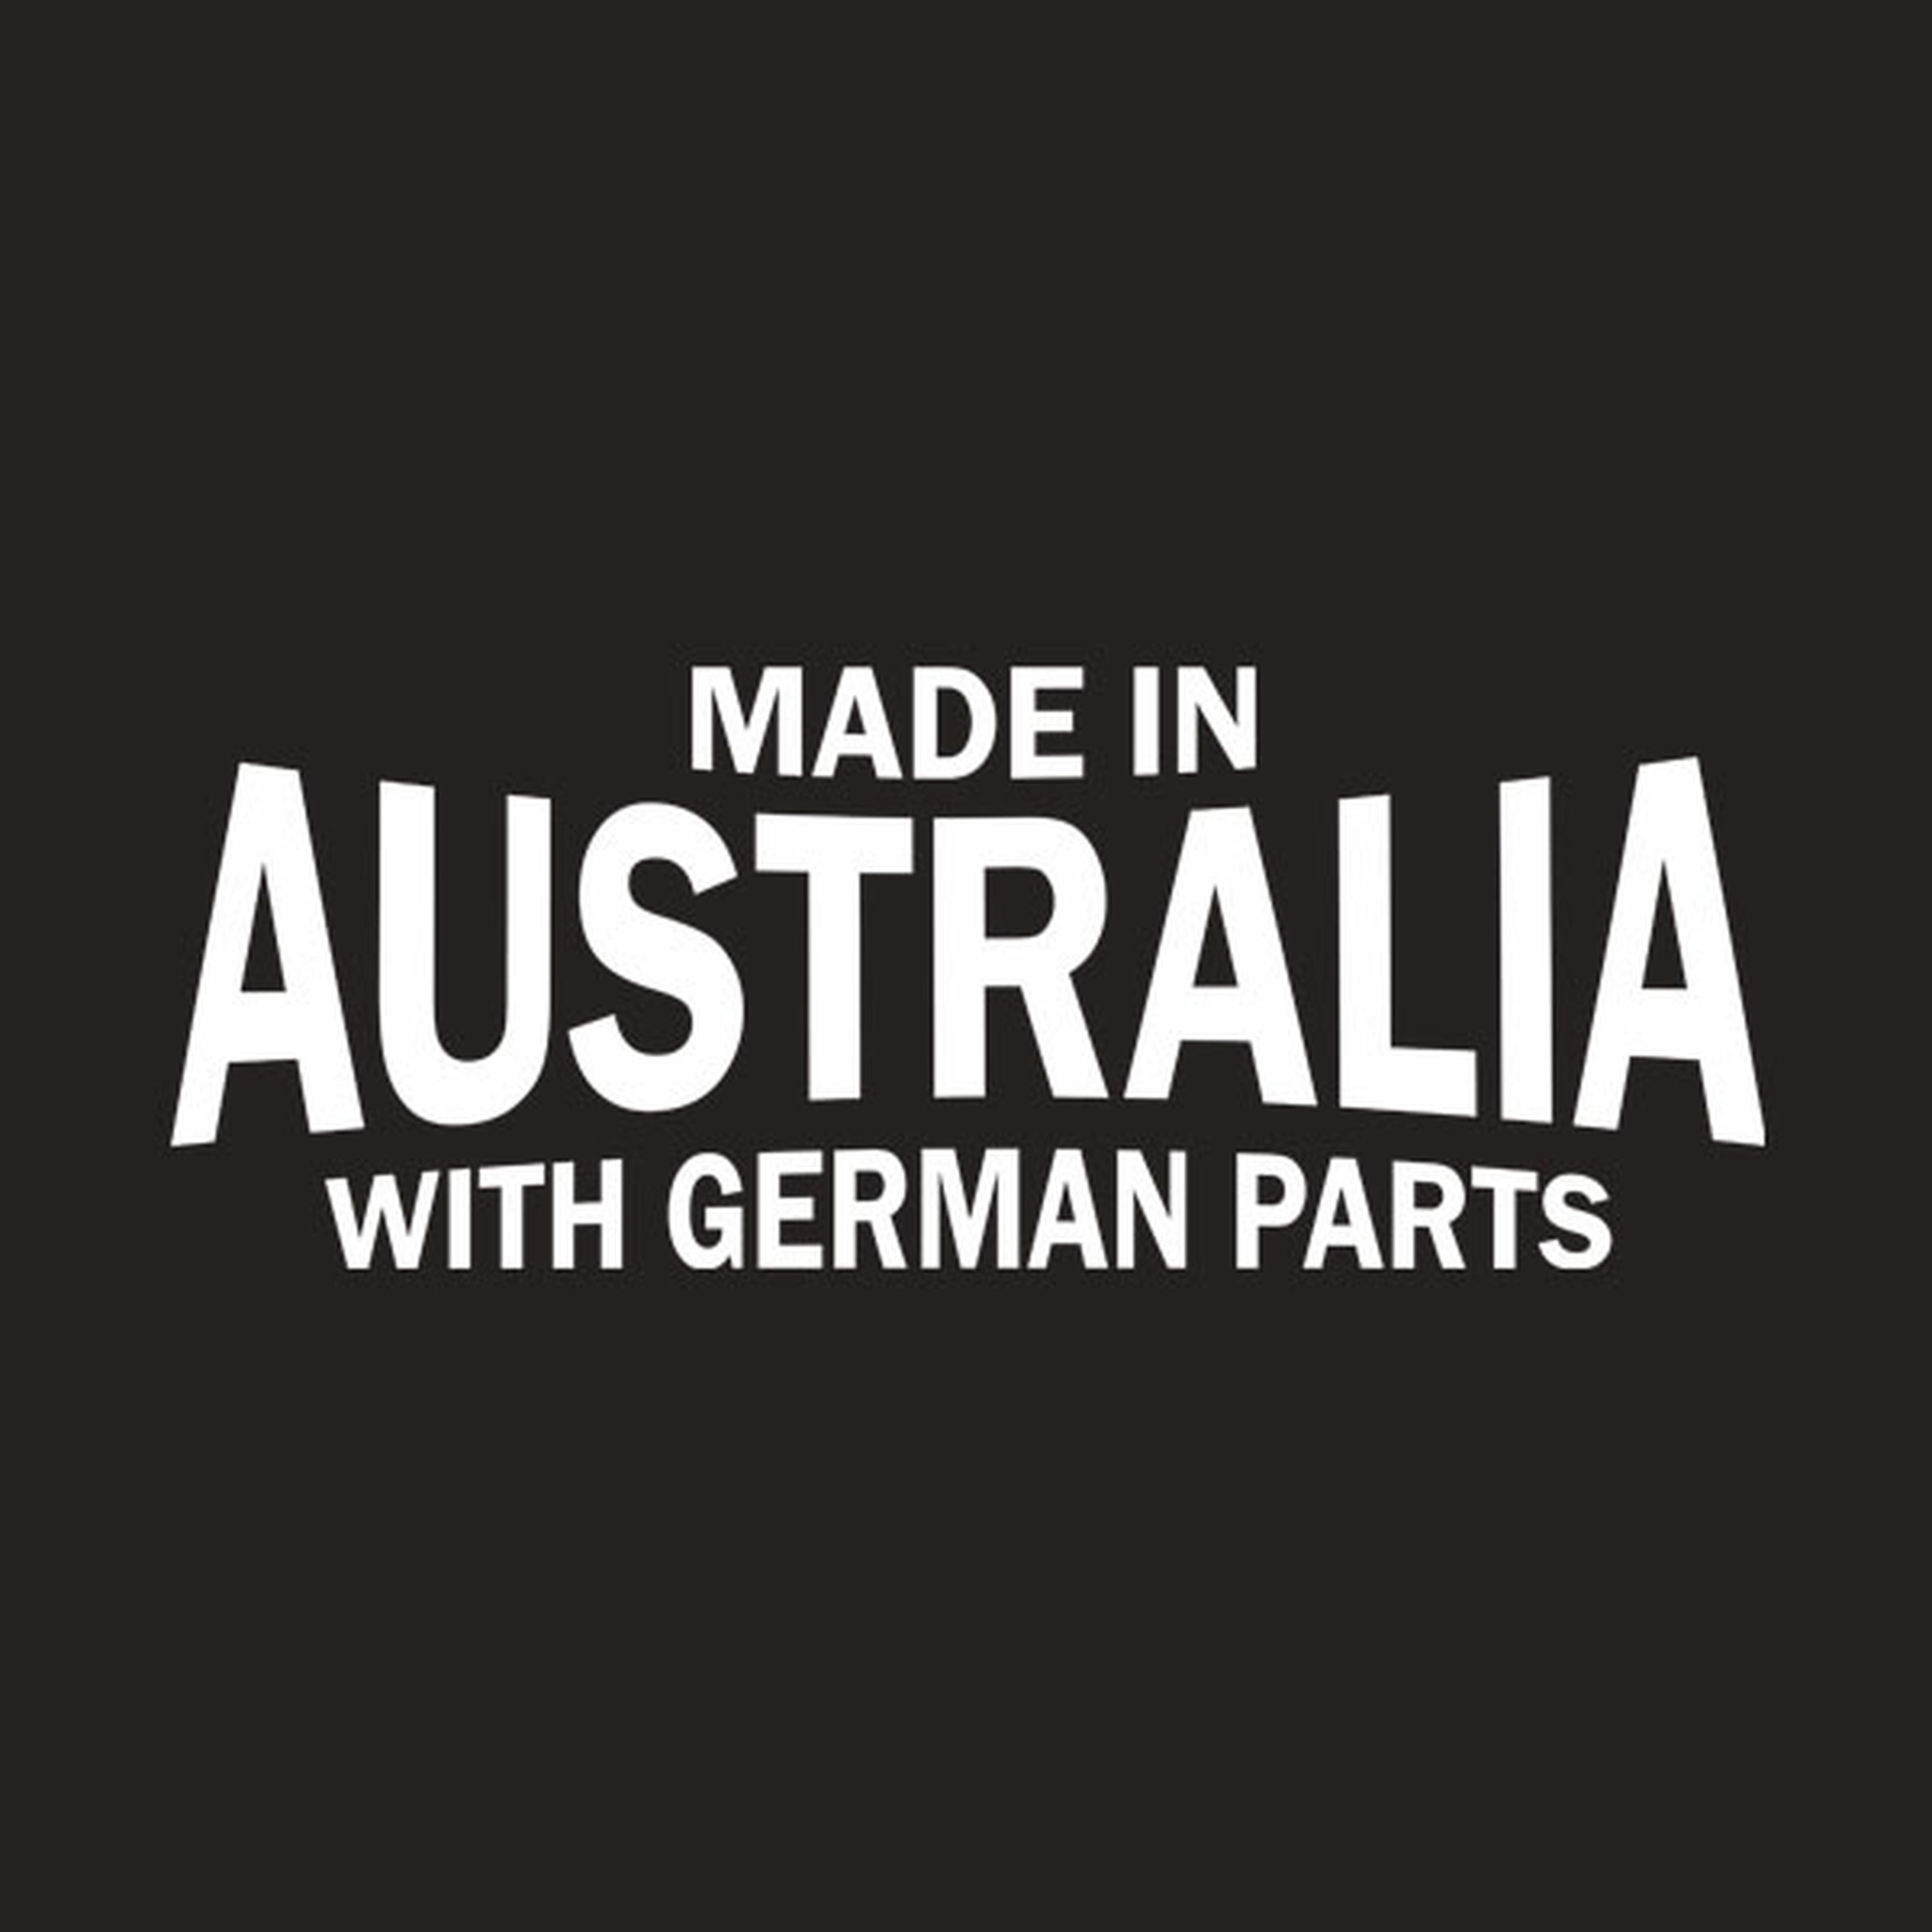 Made in Australia with German parts - T-shirt